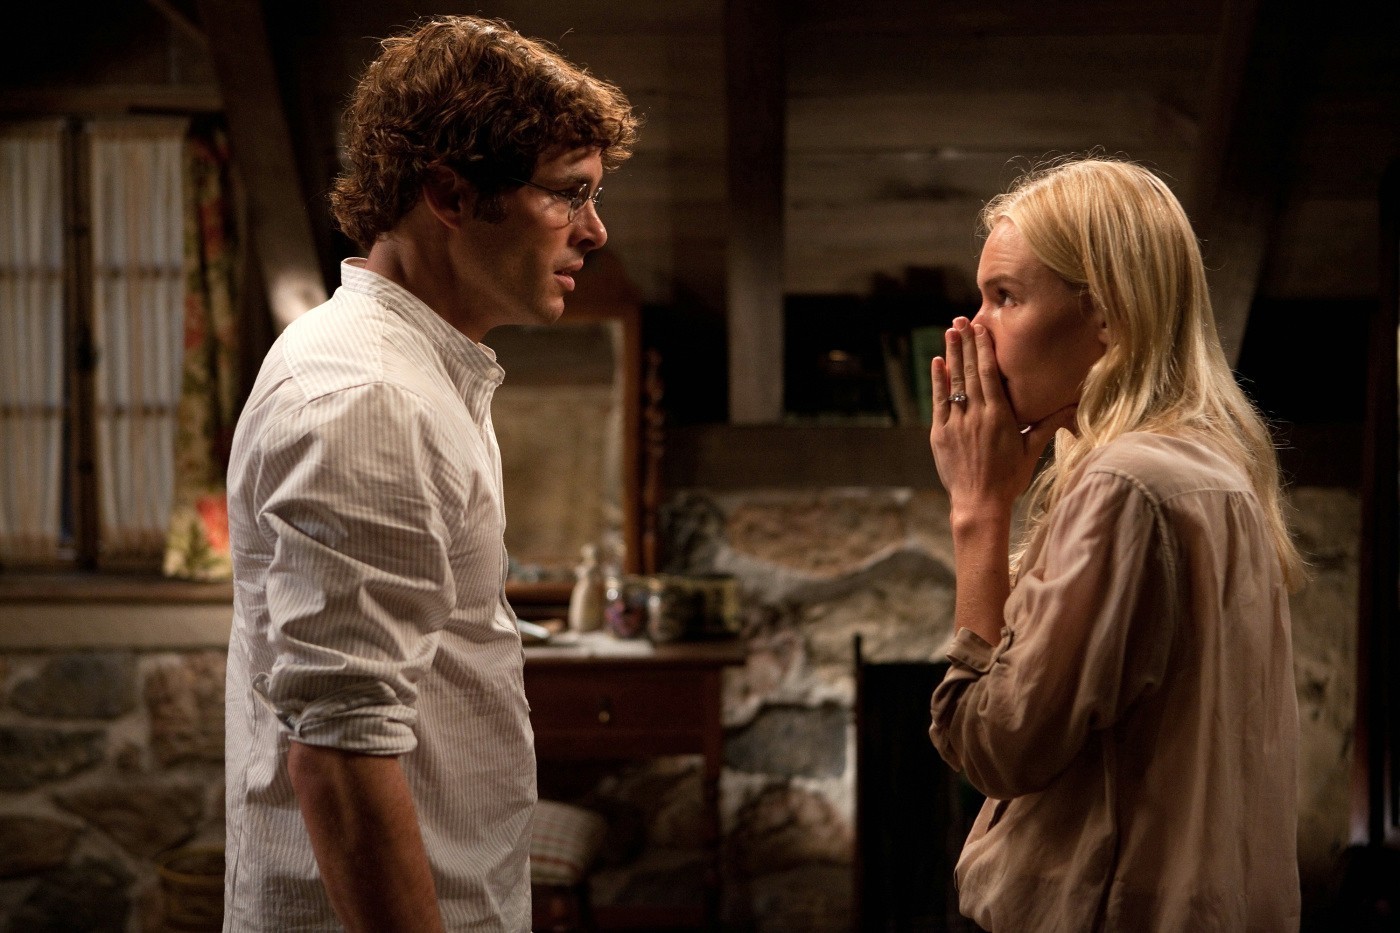 James Marsden stars as David Sumner and Kate Bosworth stars as Amy Sumner in Screen Gems' Straw Dogs (2011)